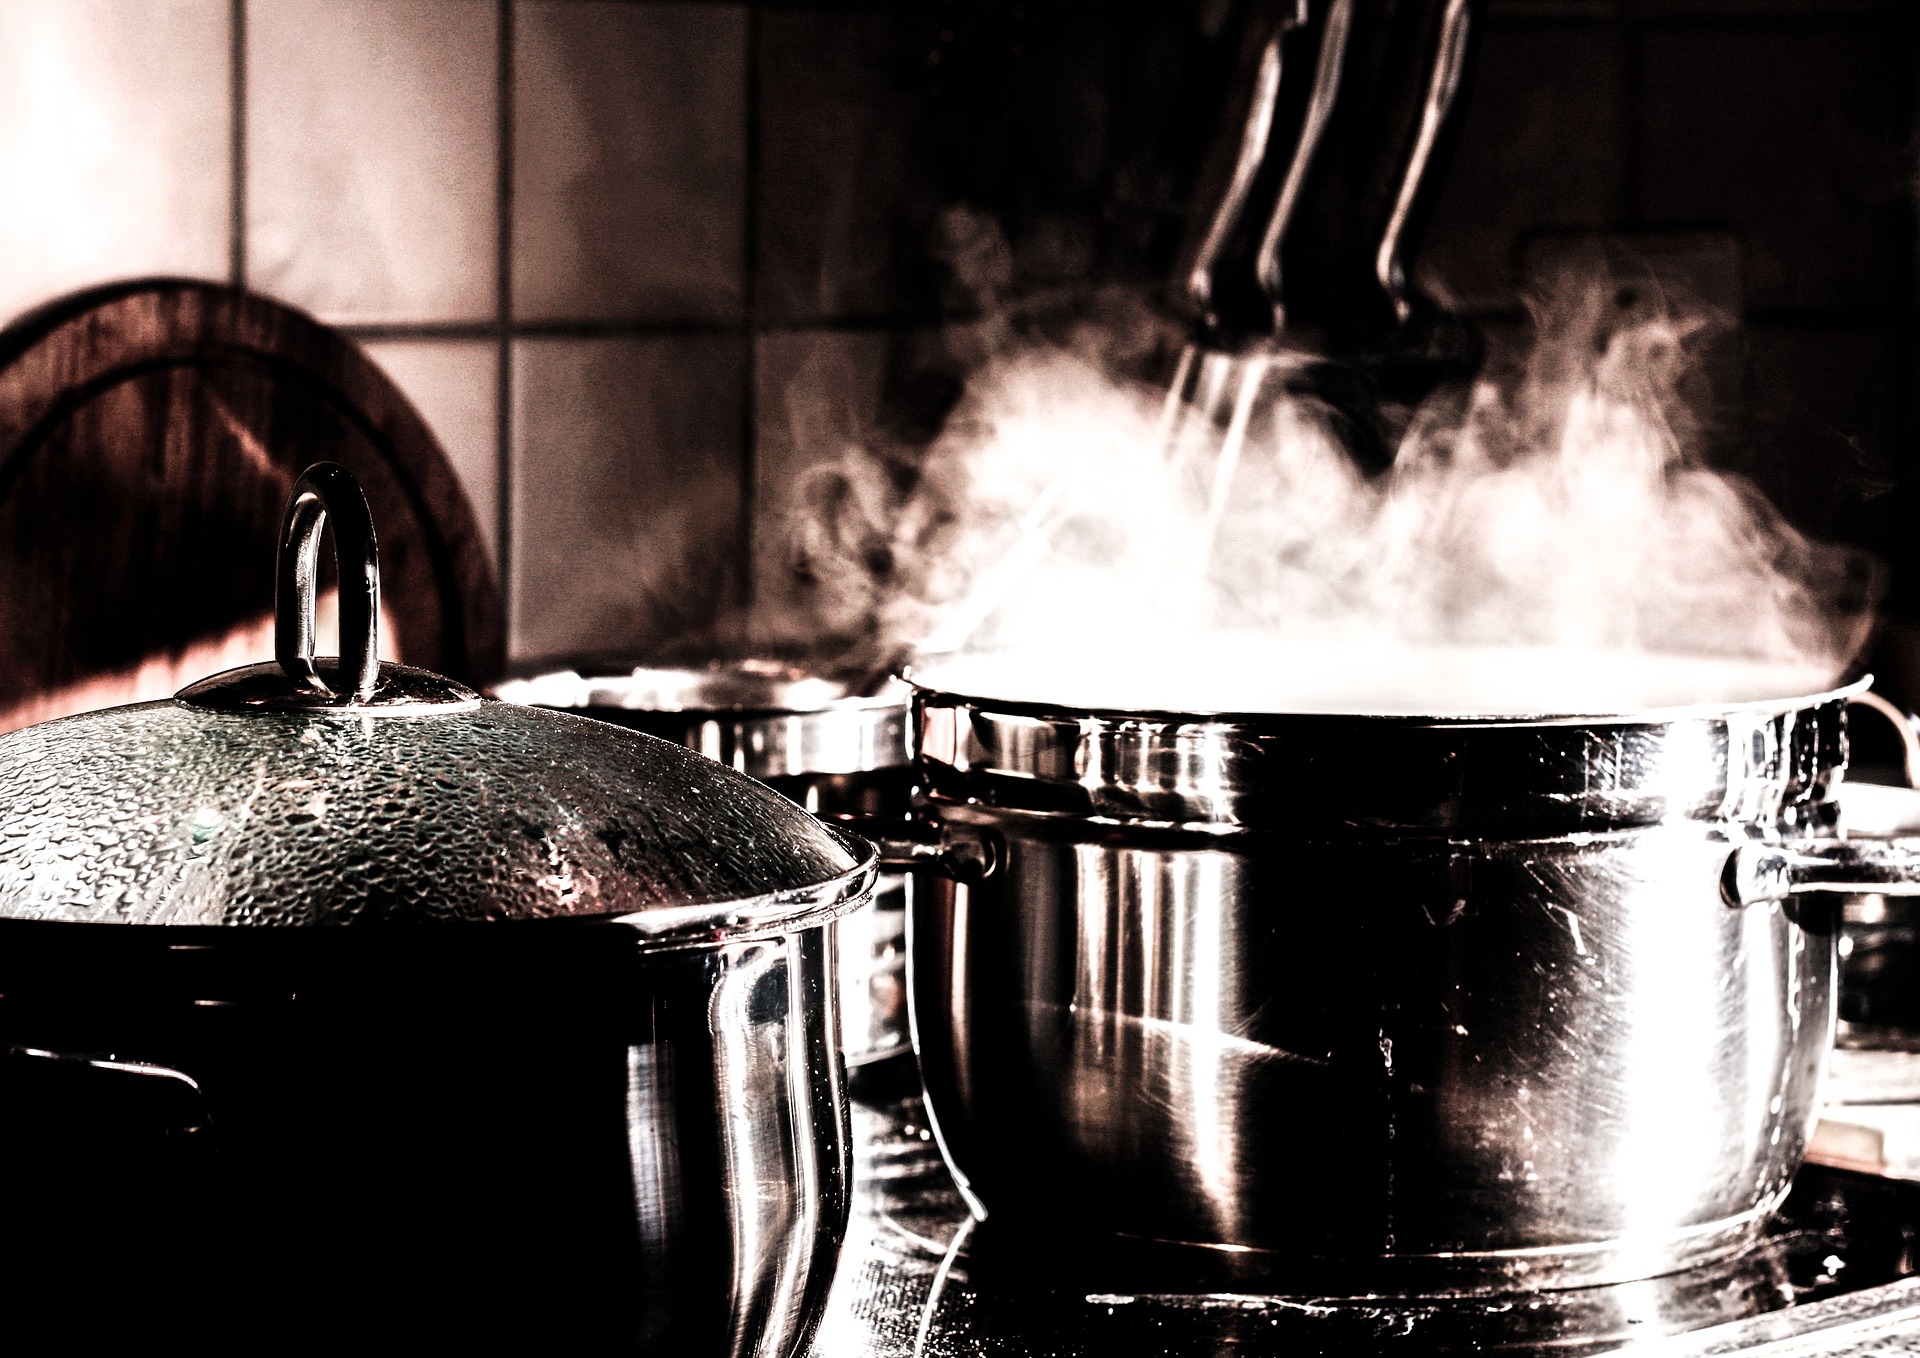 A pot on a stove with steam coming out